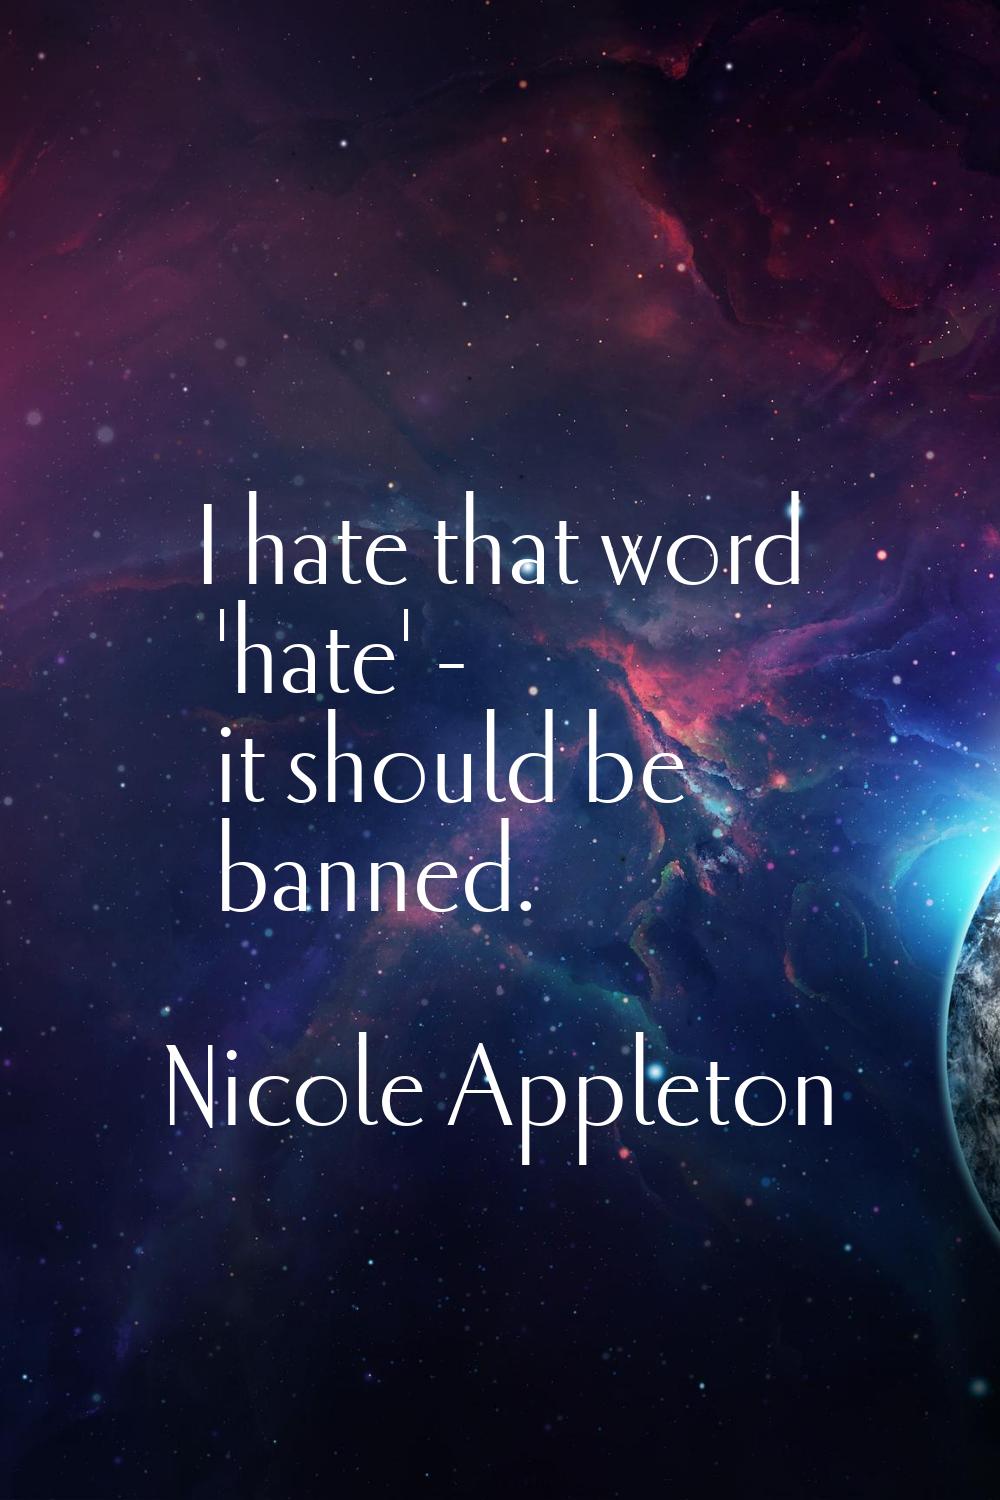 I hate that word 'hate' - it should be banned.